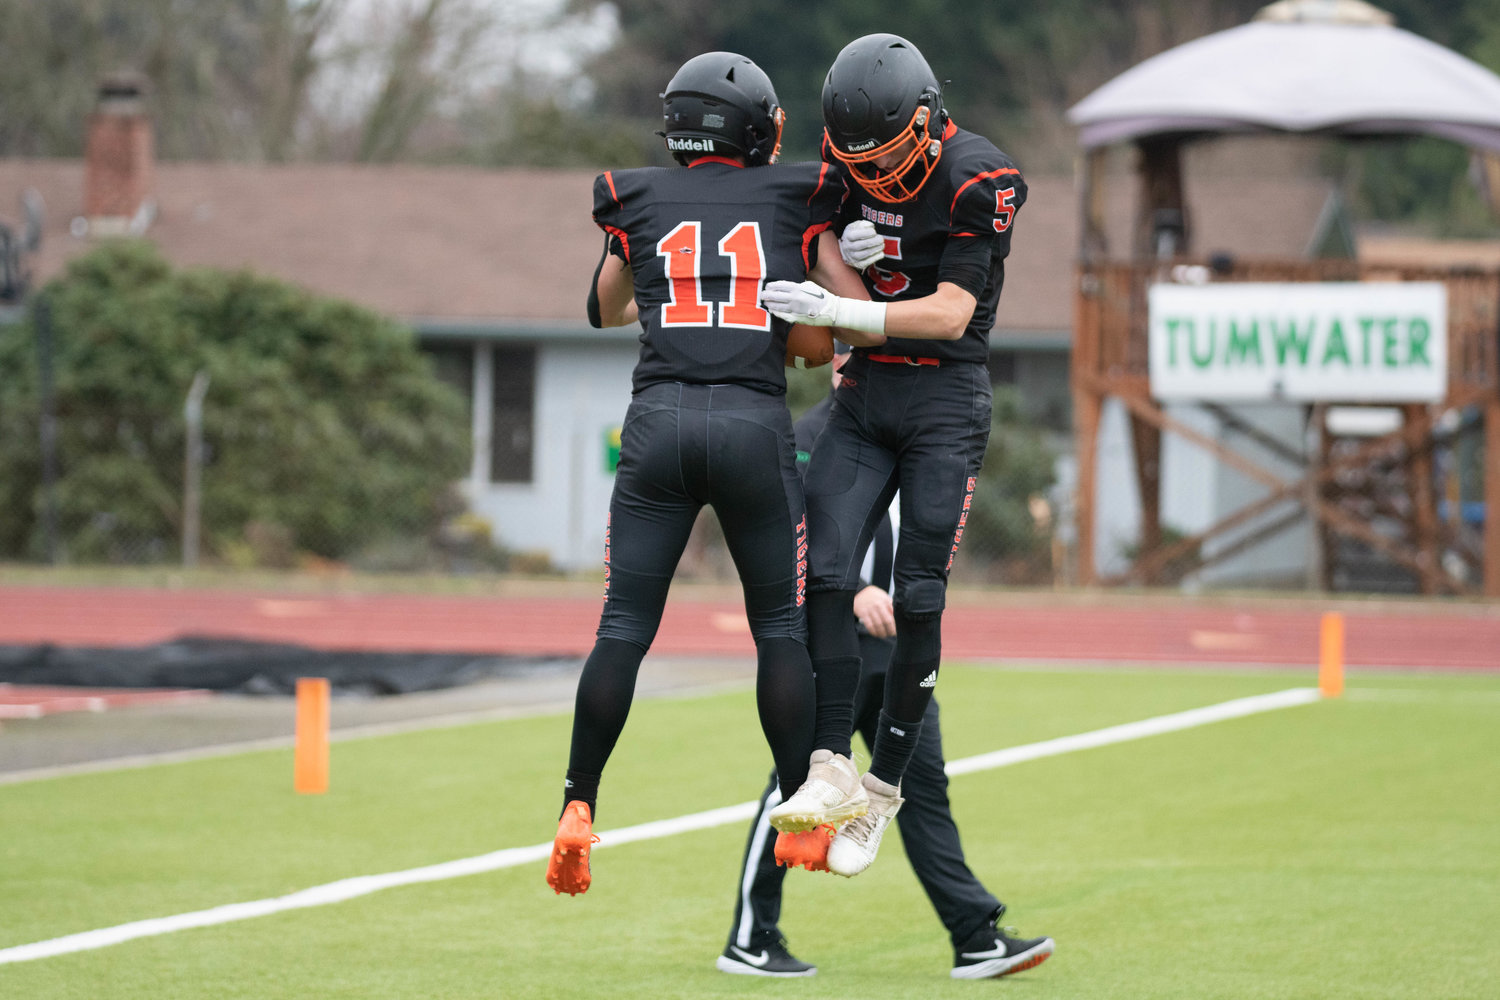 Colin Shields (11) celebrates a first-quarter touchdown with Karsen Denault (5) during Napavine's 49-6 semifinal win over Chewelah on Nov. 26 in Tumwater.